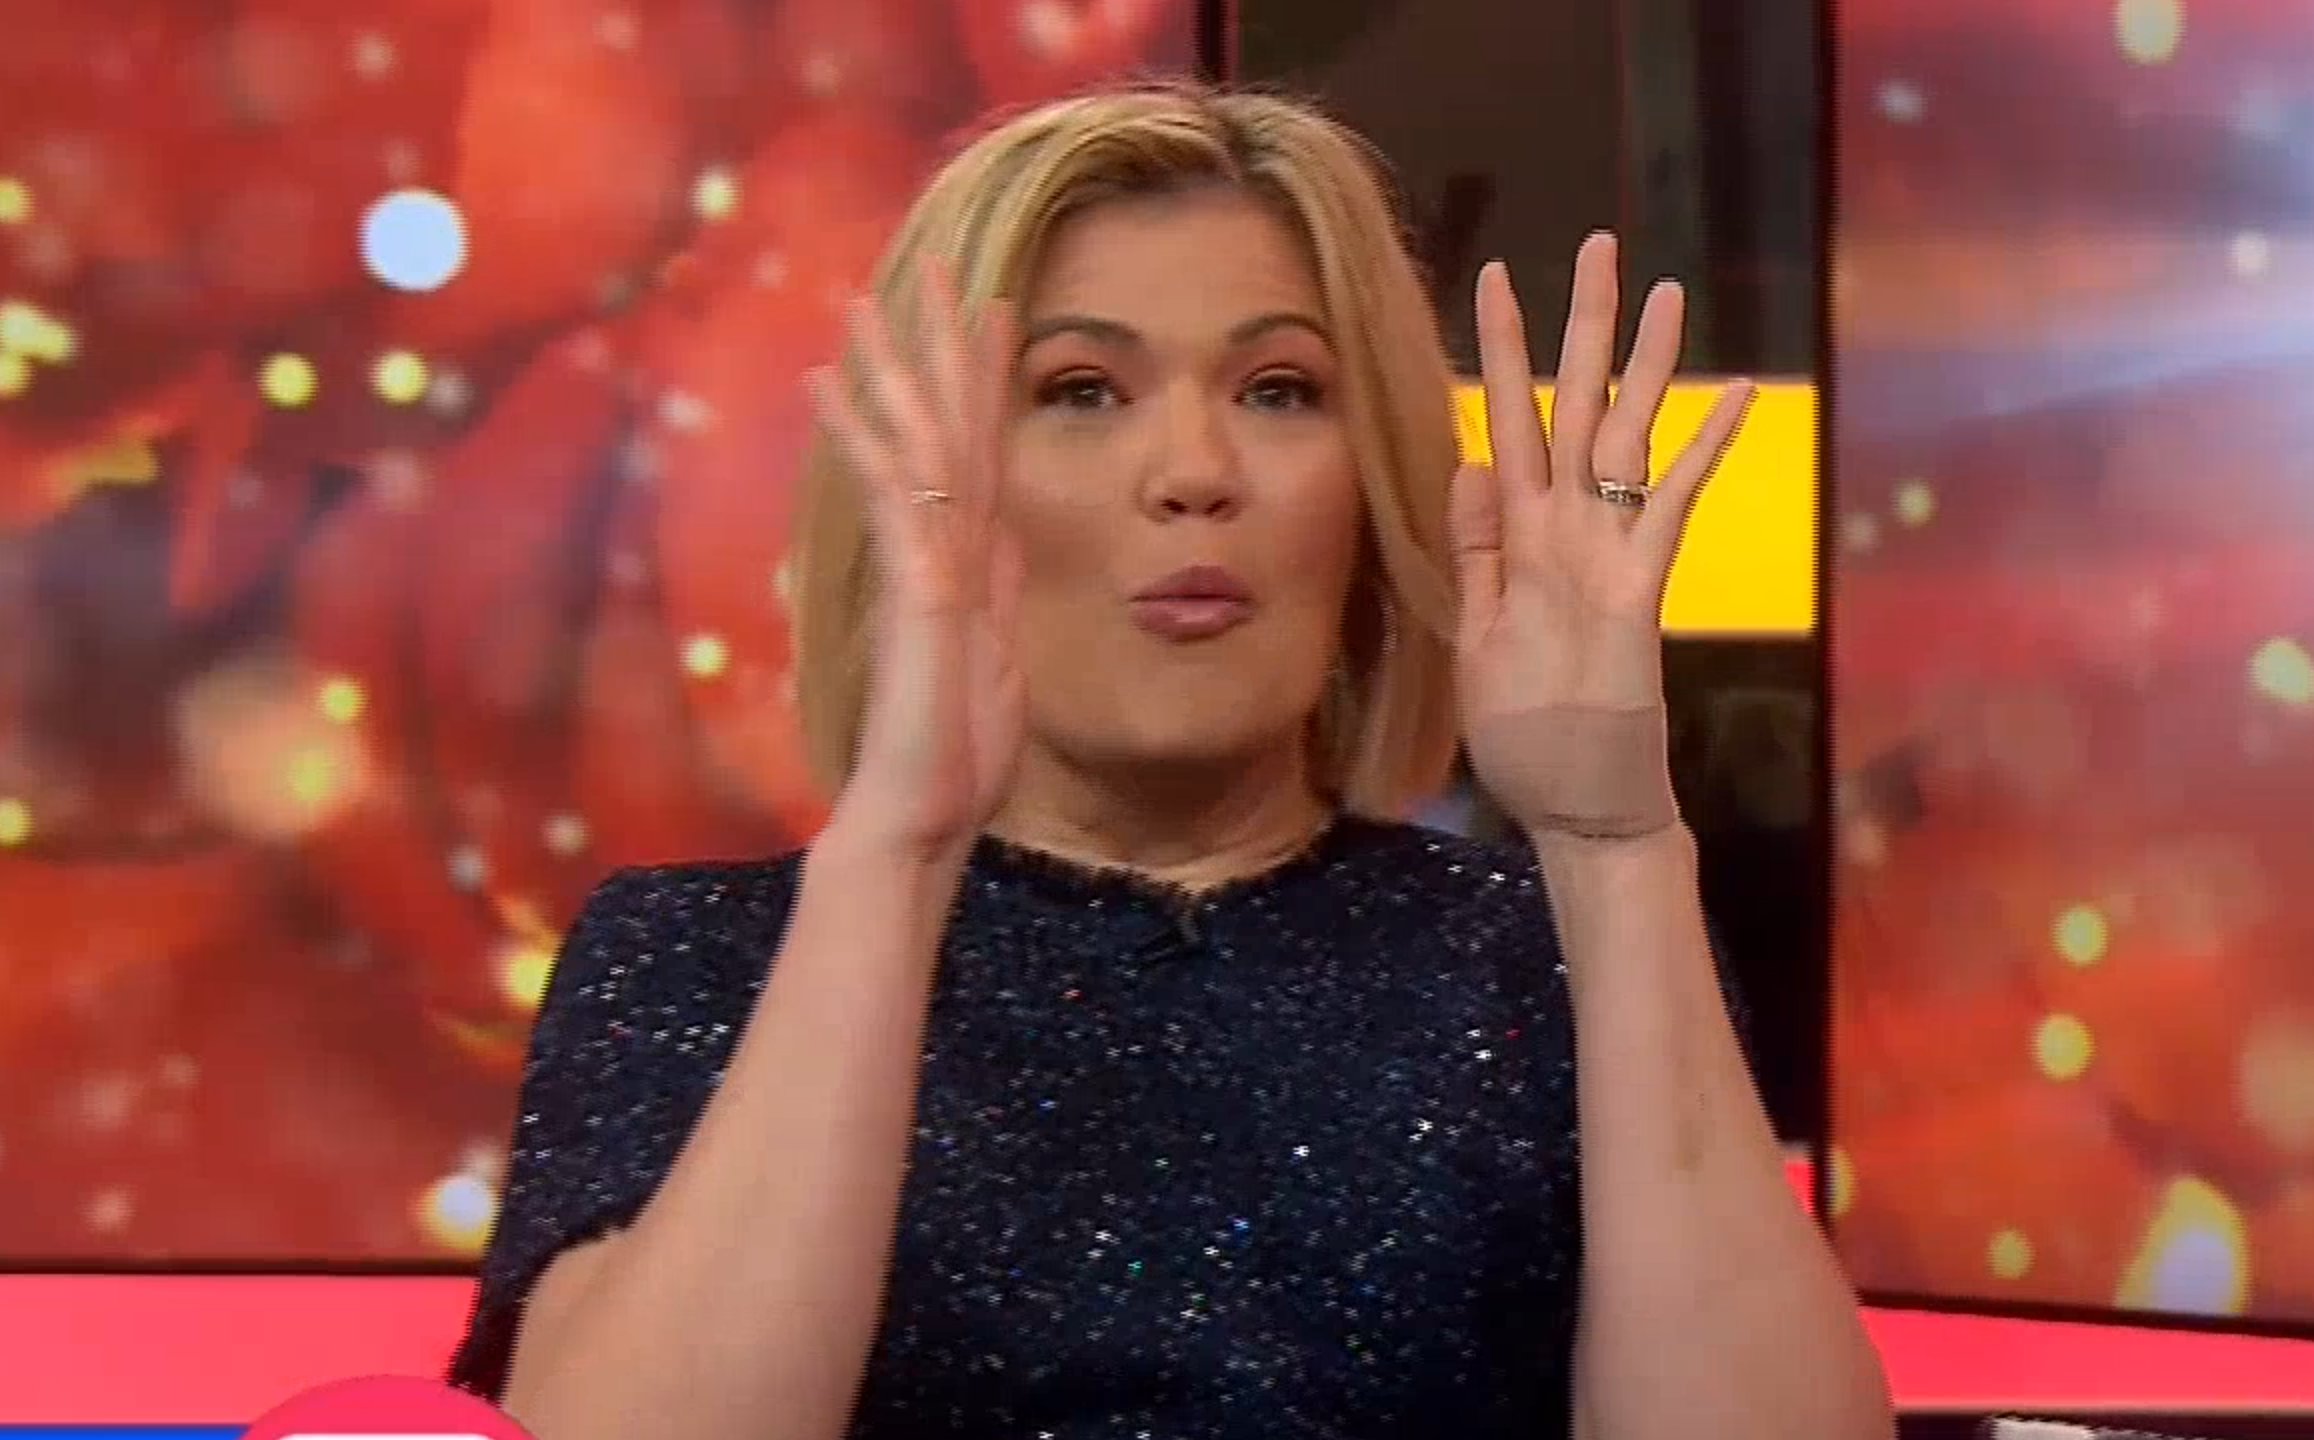   Sarah Harris  was shocked when the F bomb was dropped live on  Studio 10  